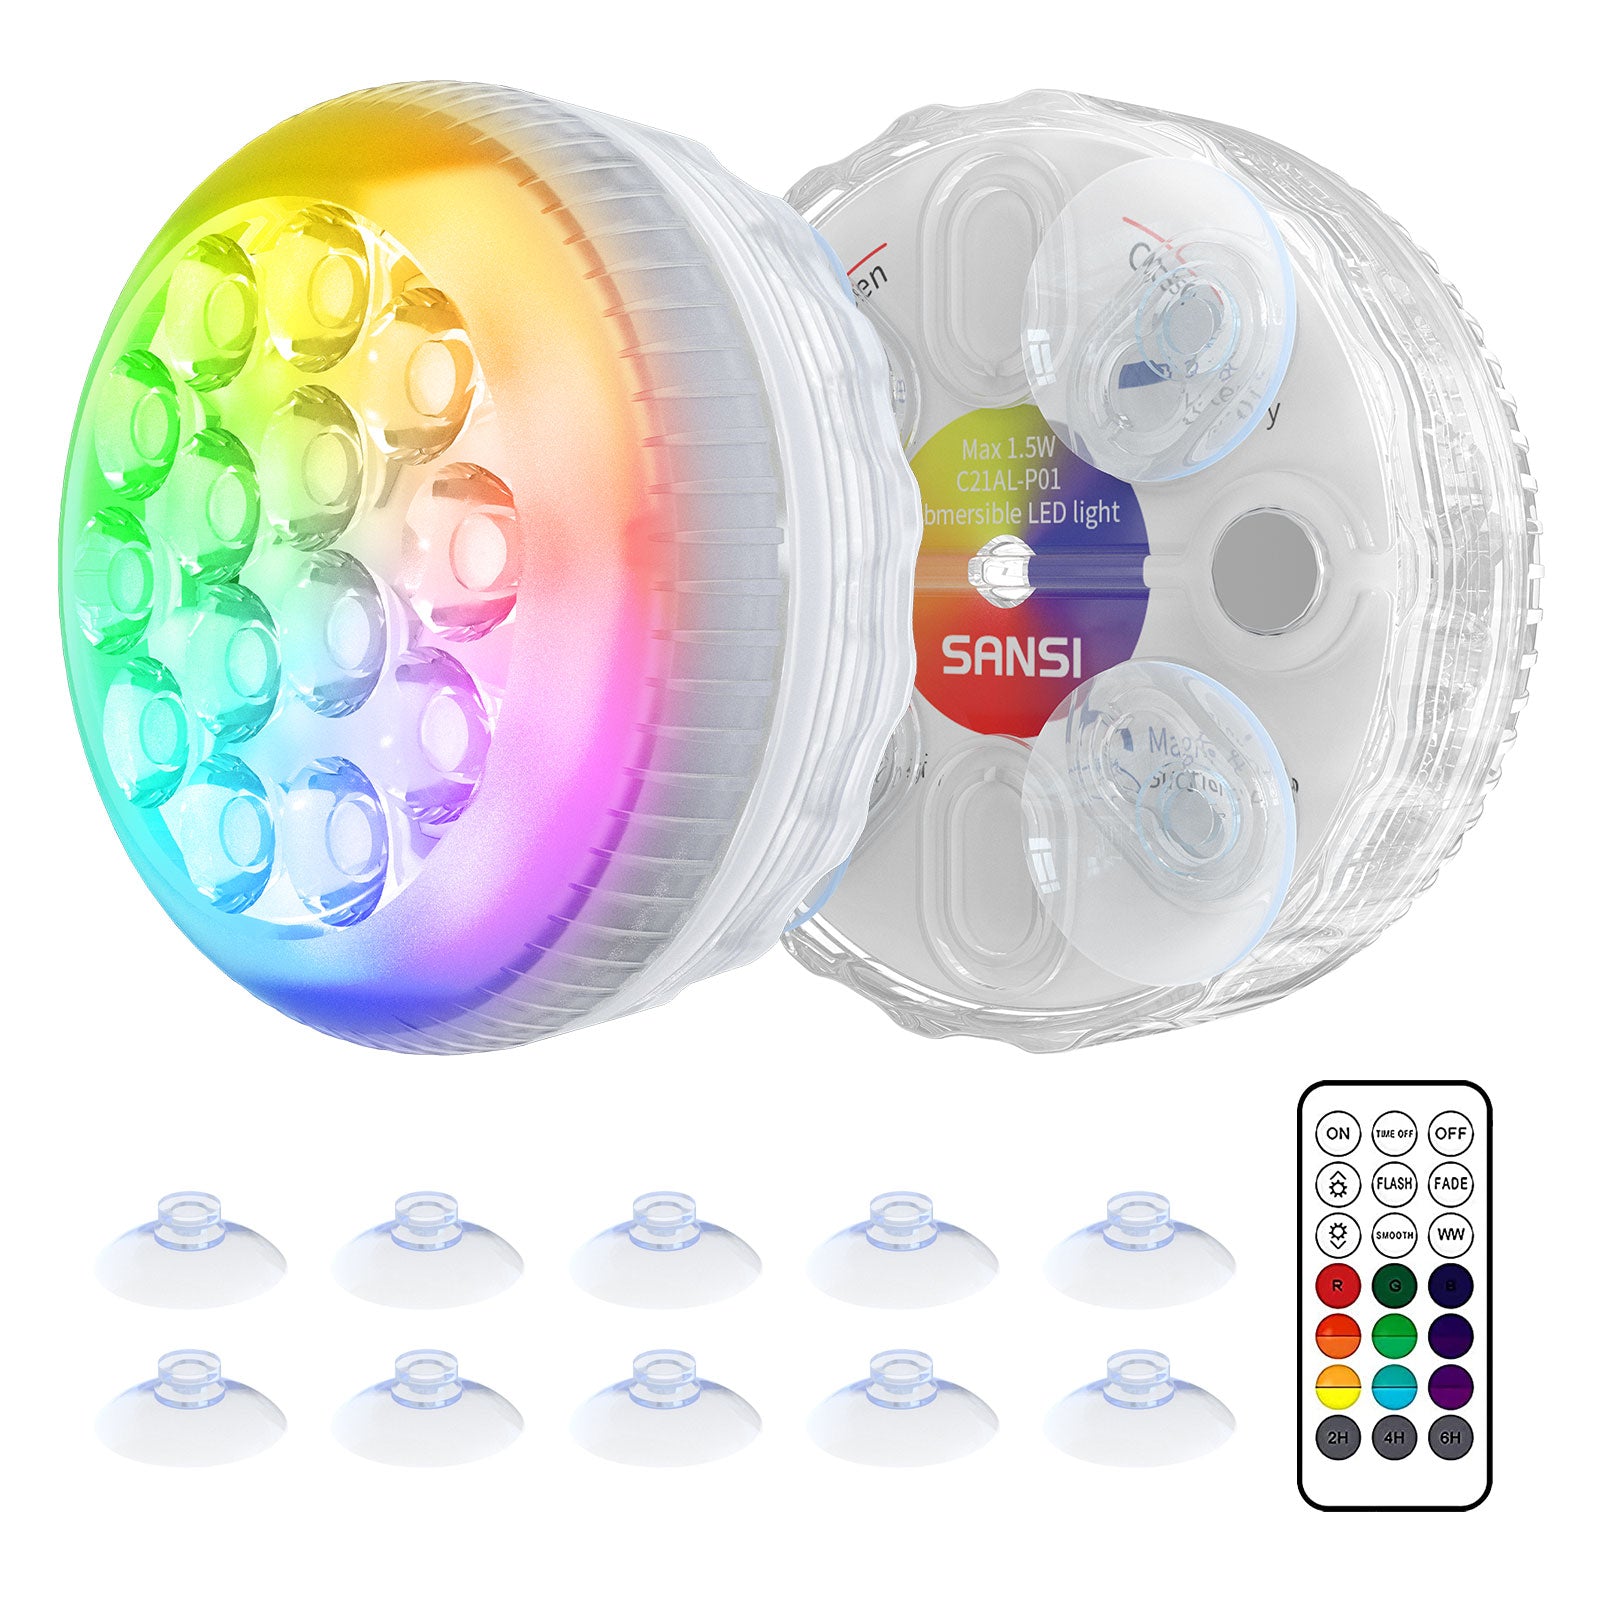 RGB LED Submersible Pool Light (US ONLY)